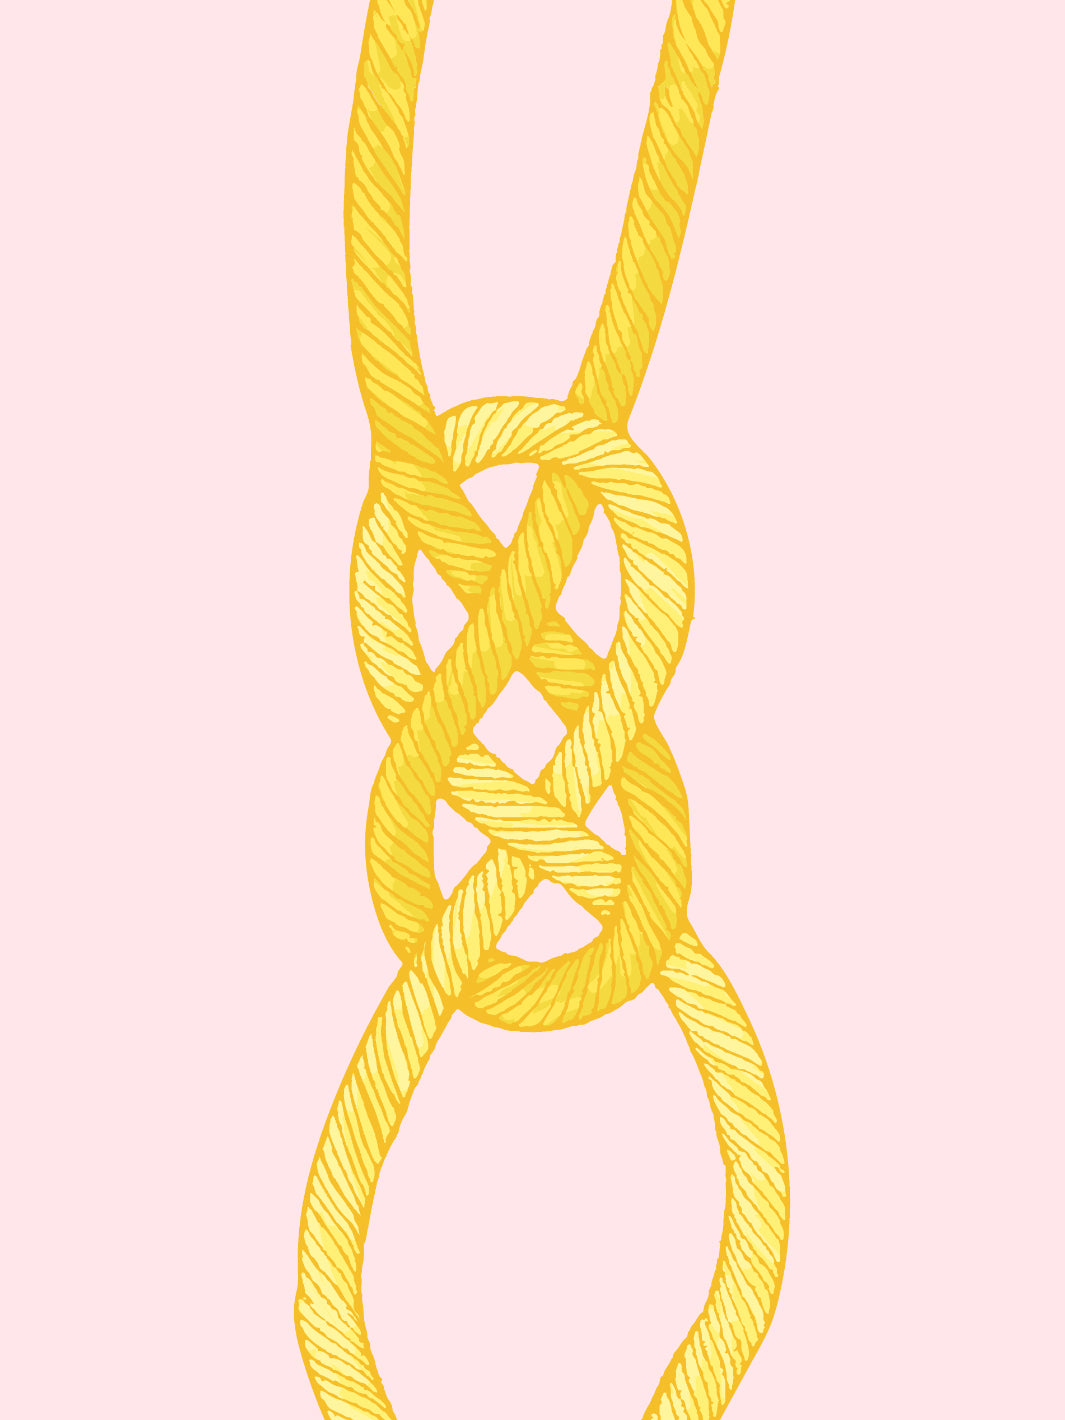 'Barbie™ Knot' Wallpaper by Barbie™ - Yellow